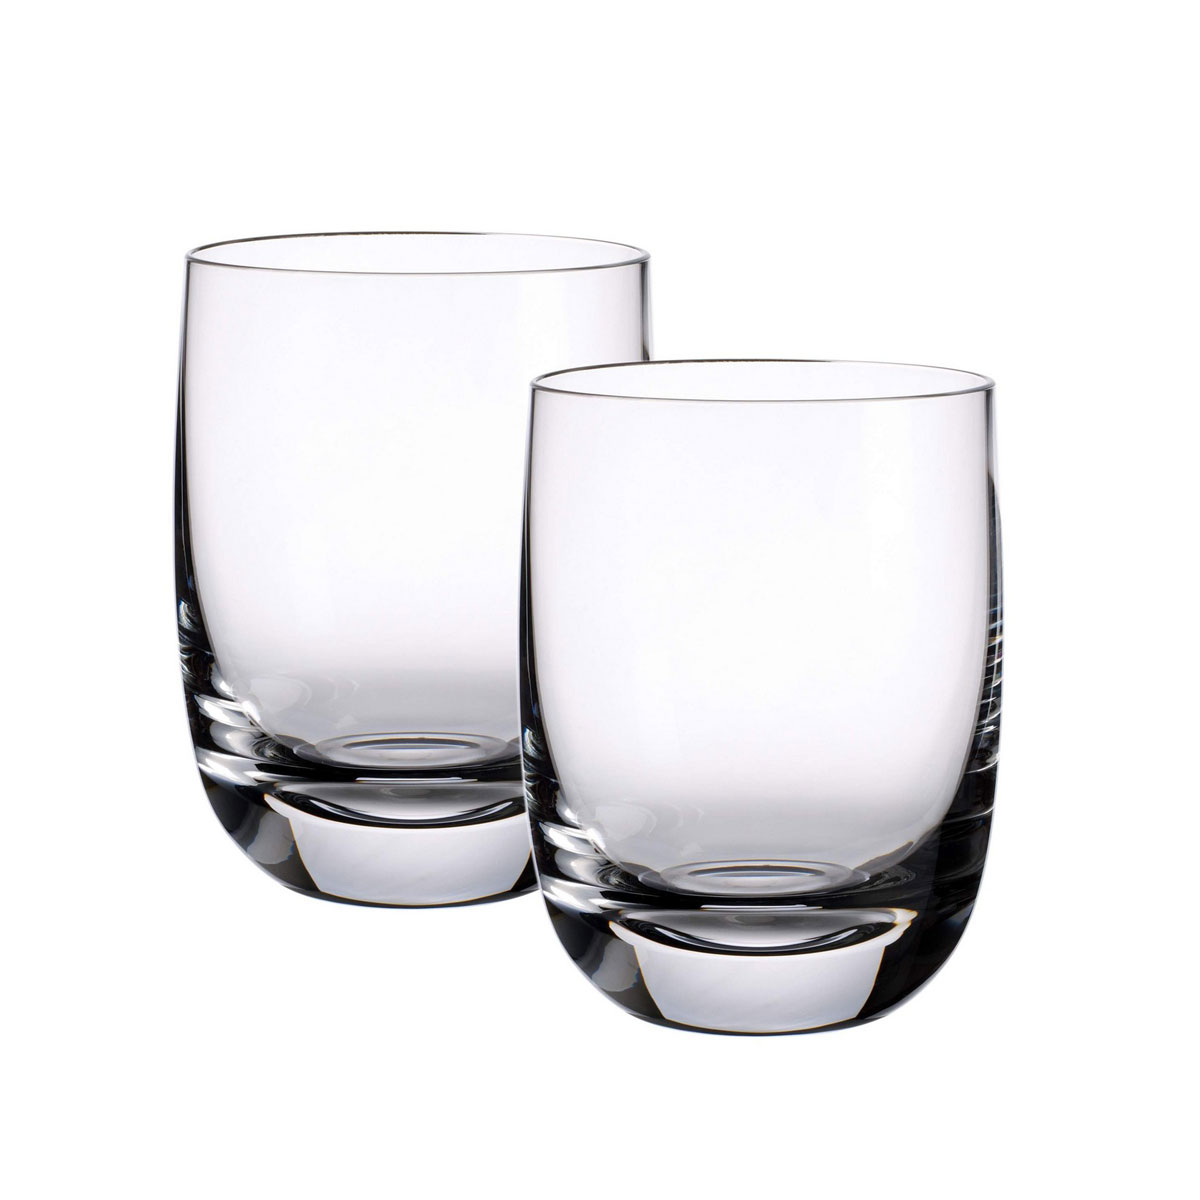 Villeroy and Boch American Bar Scotch Whiskey Glass Blended Tumbler No. 3 Pair